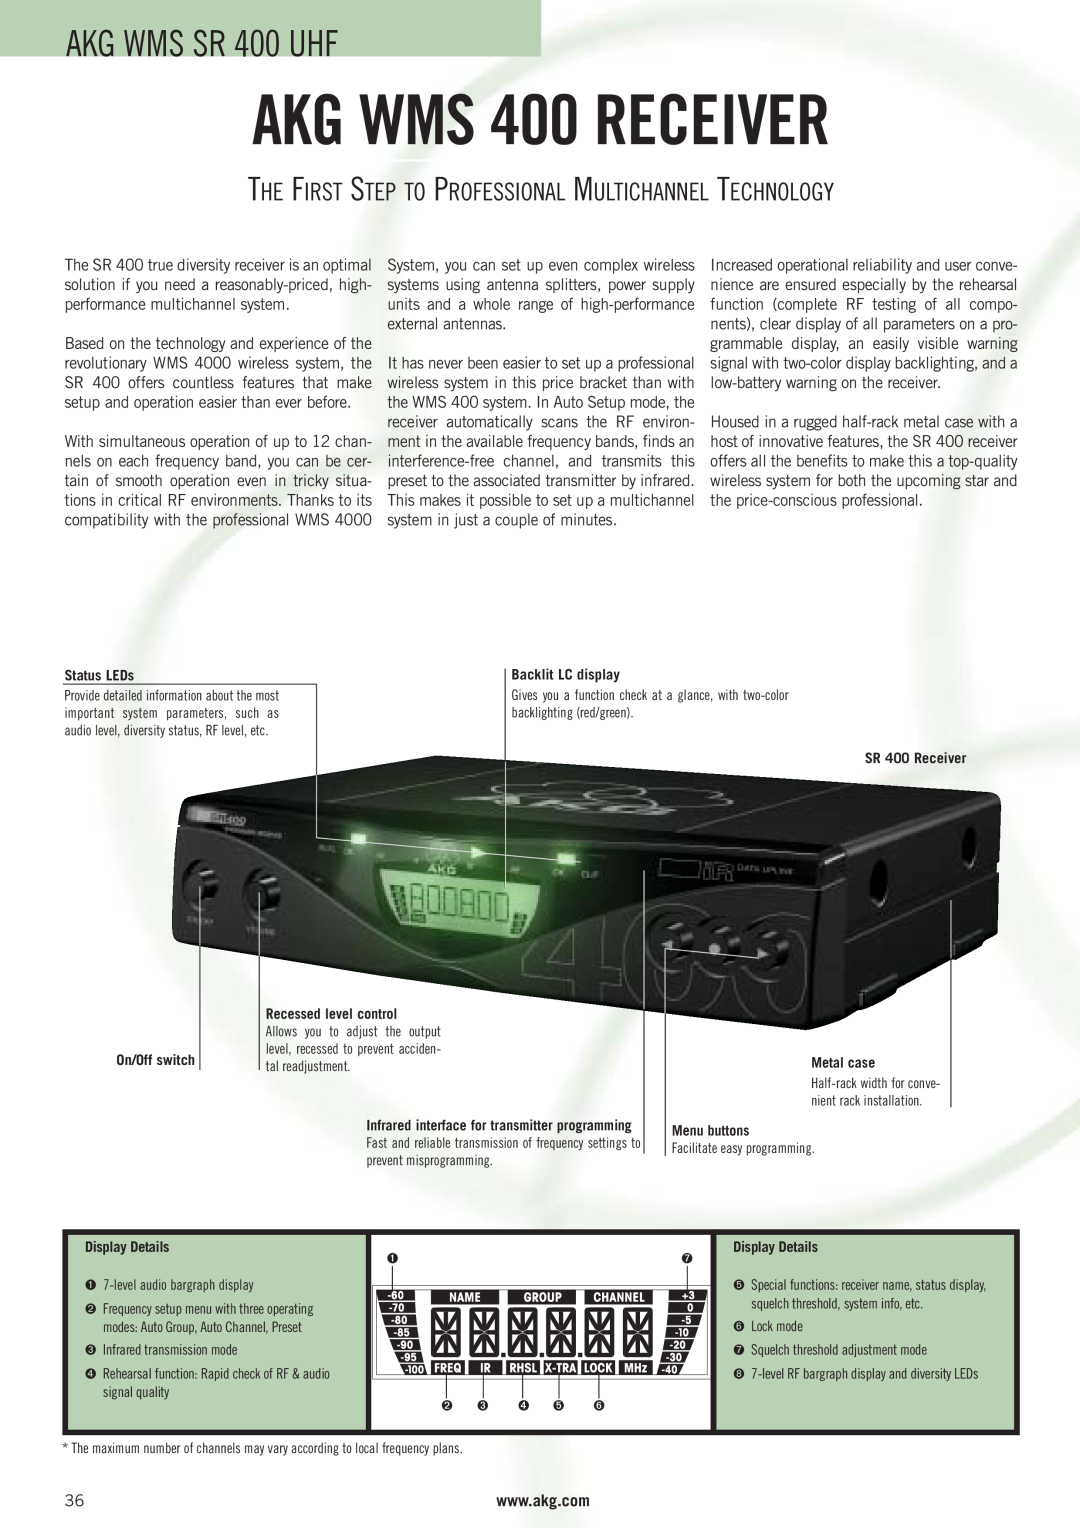 AKG Acoustics manual AKG WMS 400 RECEIVER, AKG WMS SR 400 UHF, The First Step To Professional Multichannel Technology 